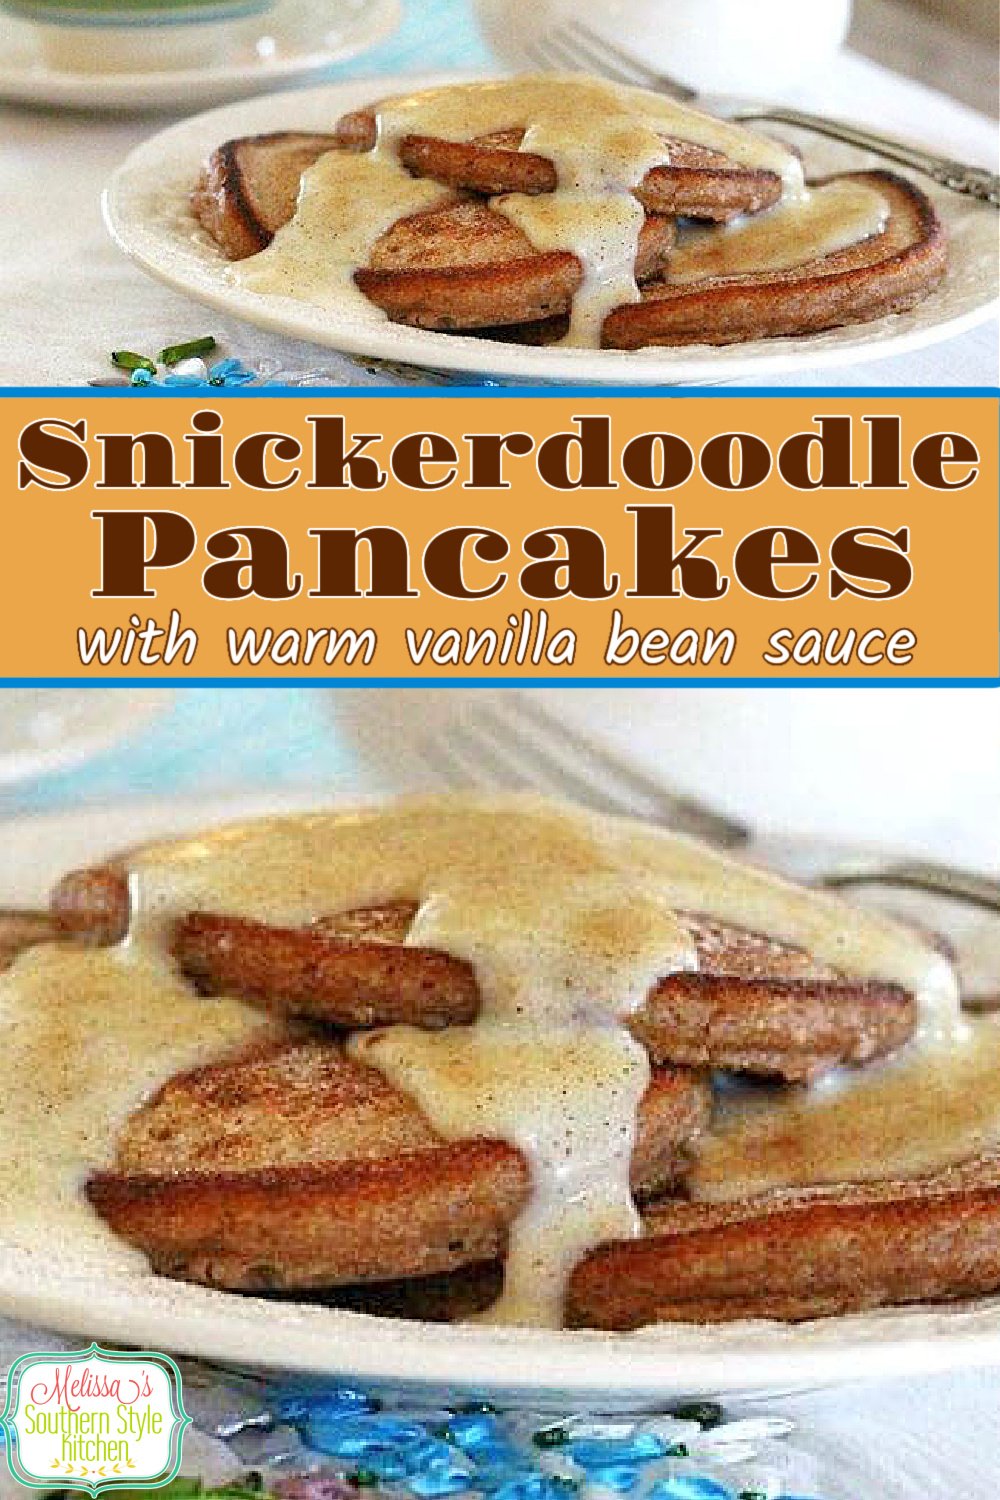 Snickerdoodle Pancakes with a Warm Vanilla Bean Sauce make a decadent start to any day #pancakes #snickerdoodles #snickerdoodlepancakes #bestpancakerecipes #vanillasauce #Breakfast #brunch #holidaybrunch #southernreipes #southernfood #melissassouthernstyhlekitchen via @melissasssk